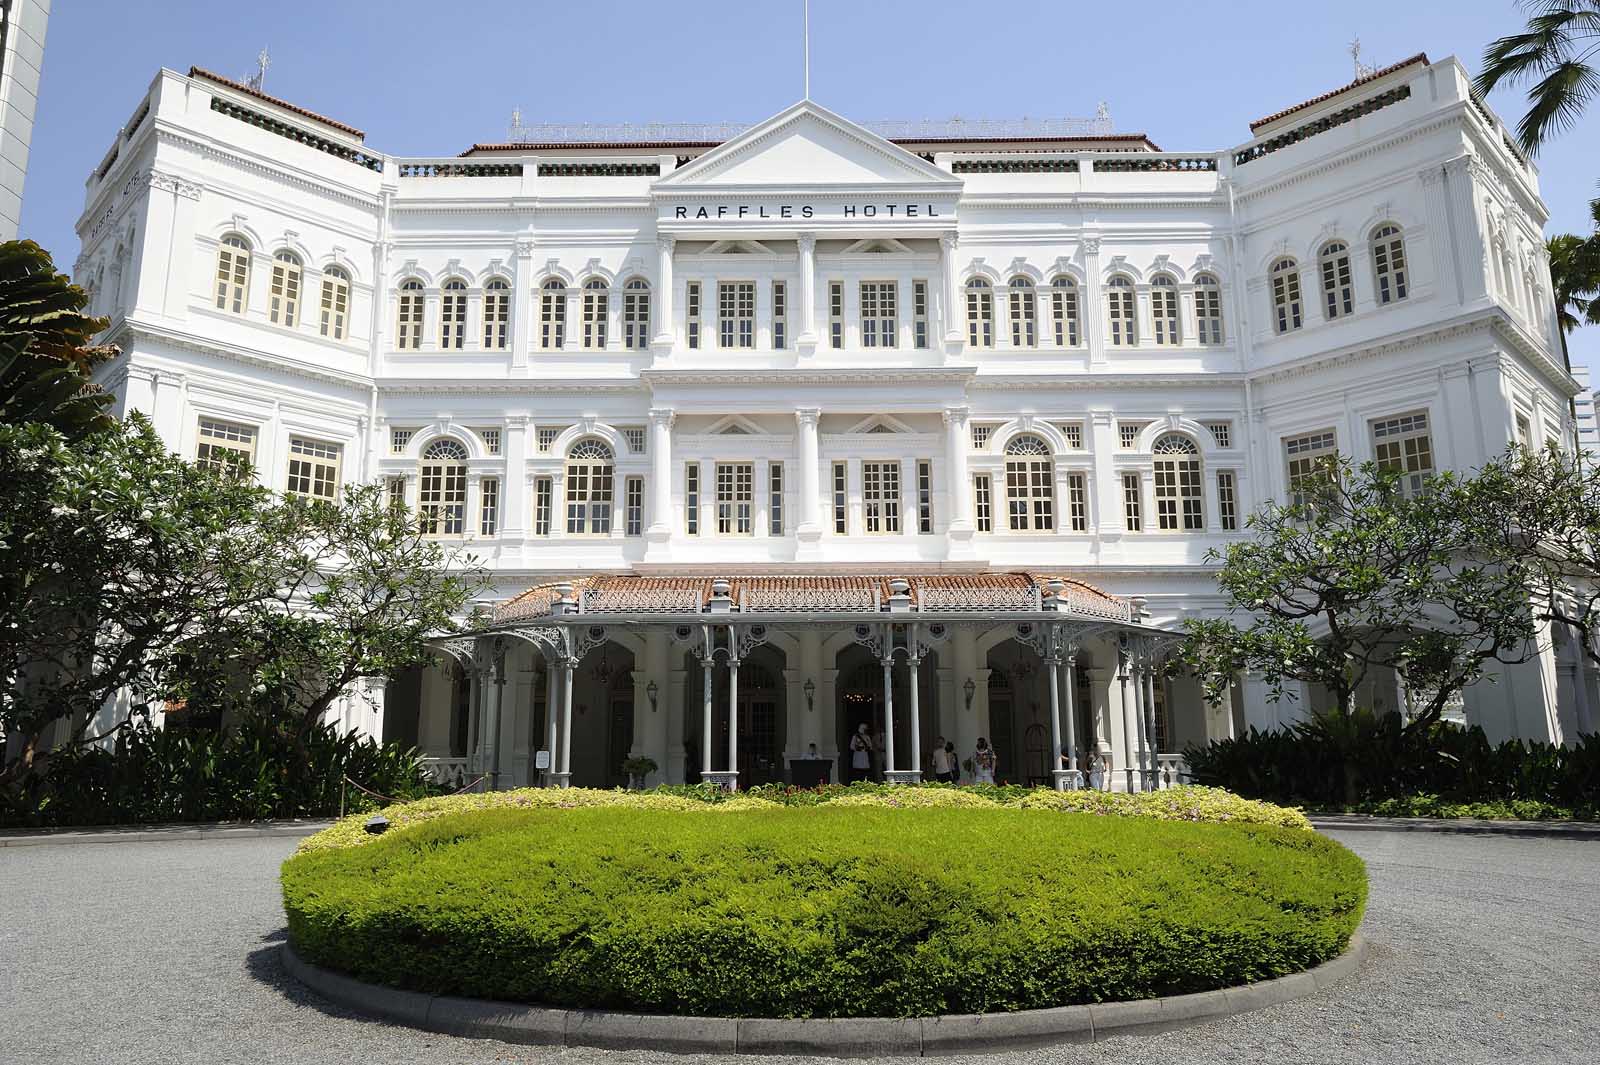 The iconic Raffles Hotel, one of the best boutique hotels in Singapore.